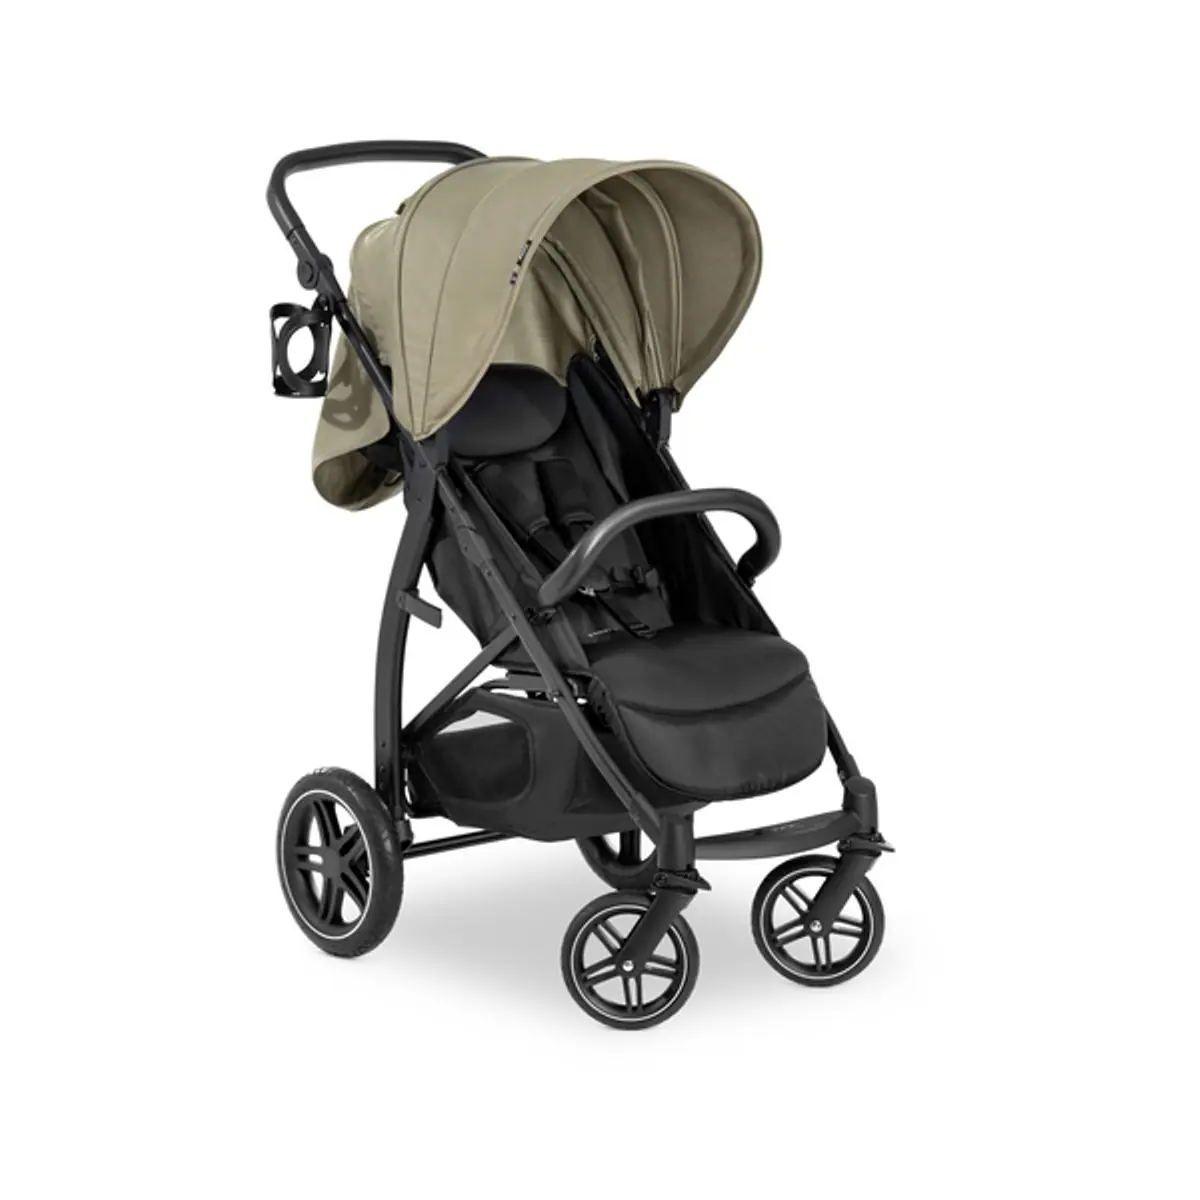 Image of Hauck Rapid 4D Stroller-Olive (New)